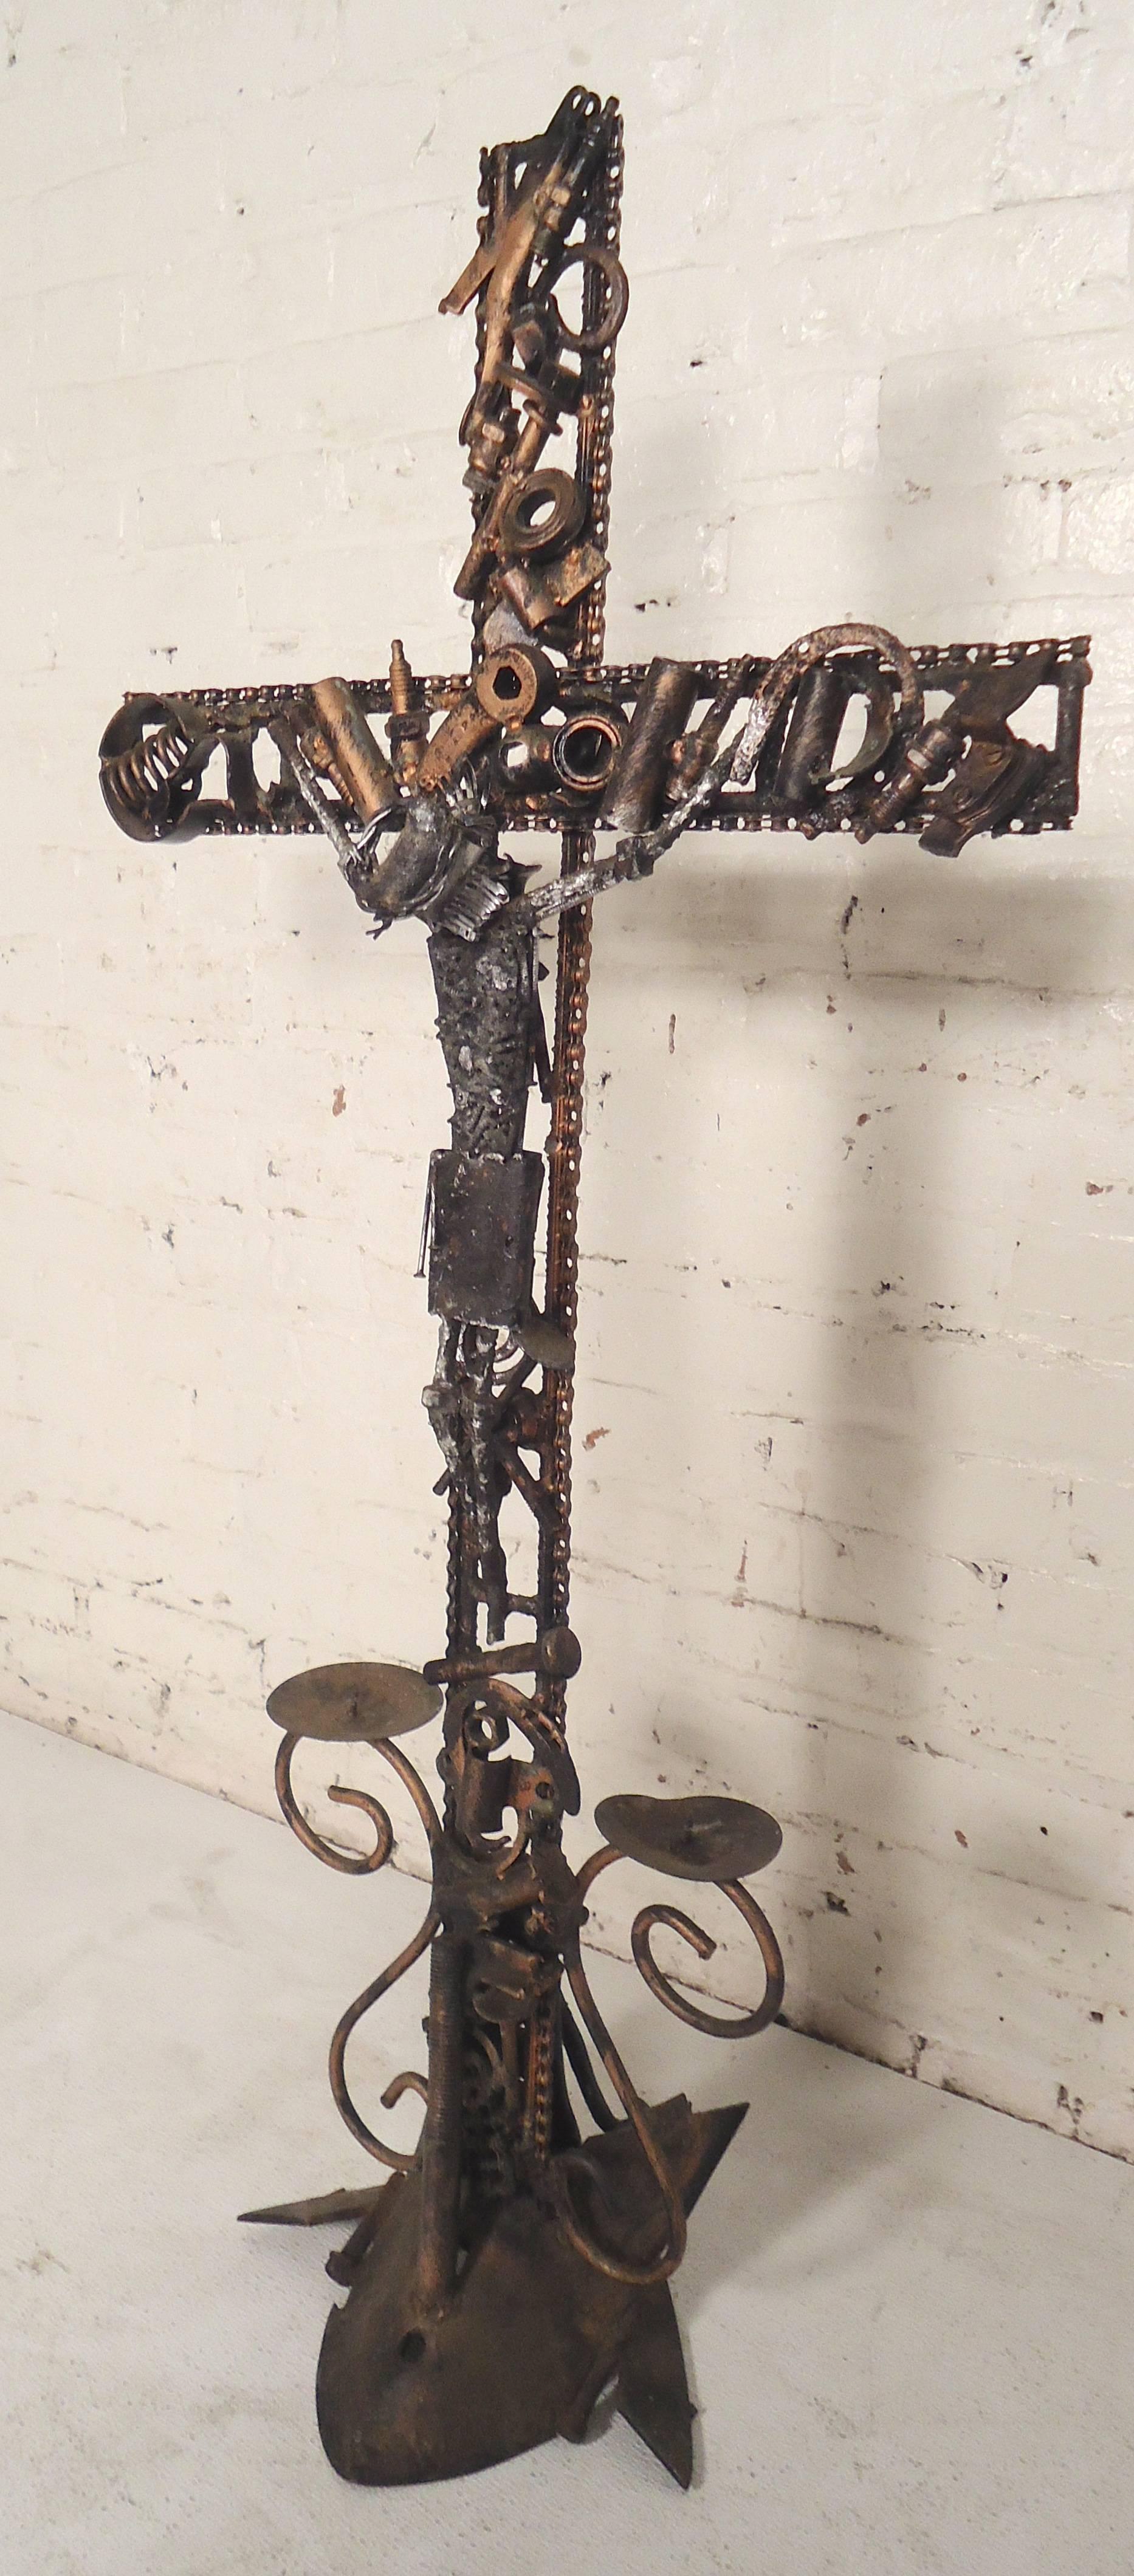 Unique crucifix made of auto parts to give a heavy Industrial style. Two candle holders at the bottom. Very unusual and handmade.

(Please confirm item location - NY or NJ - with dealer).
 